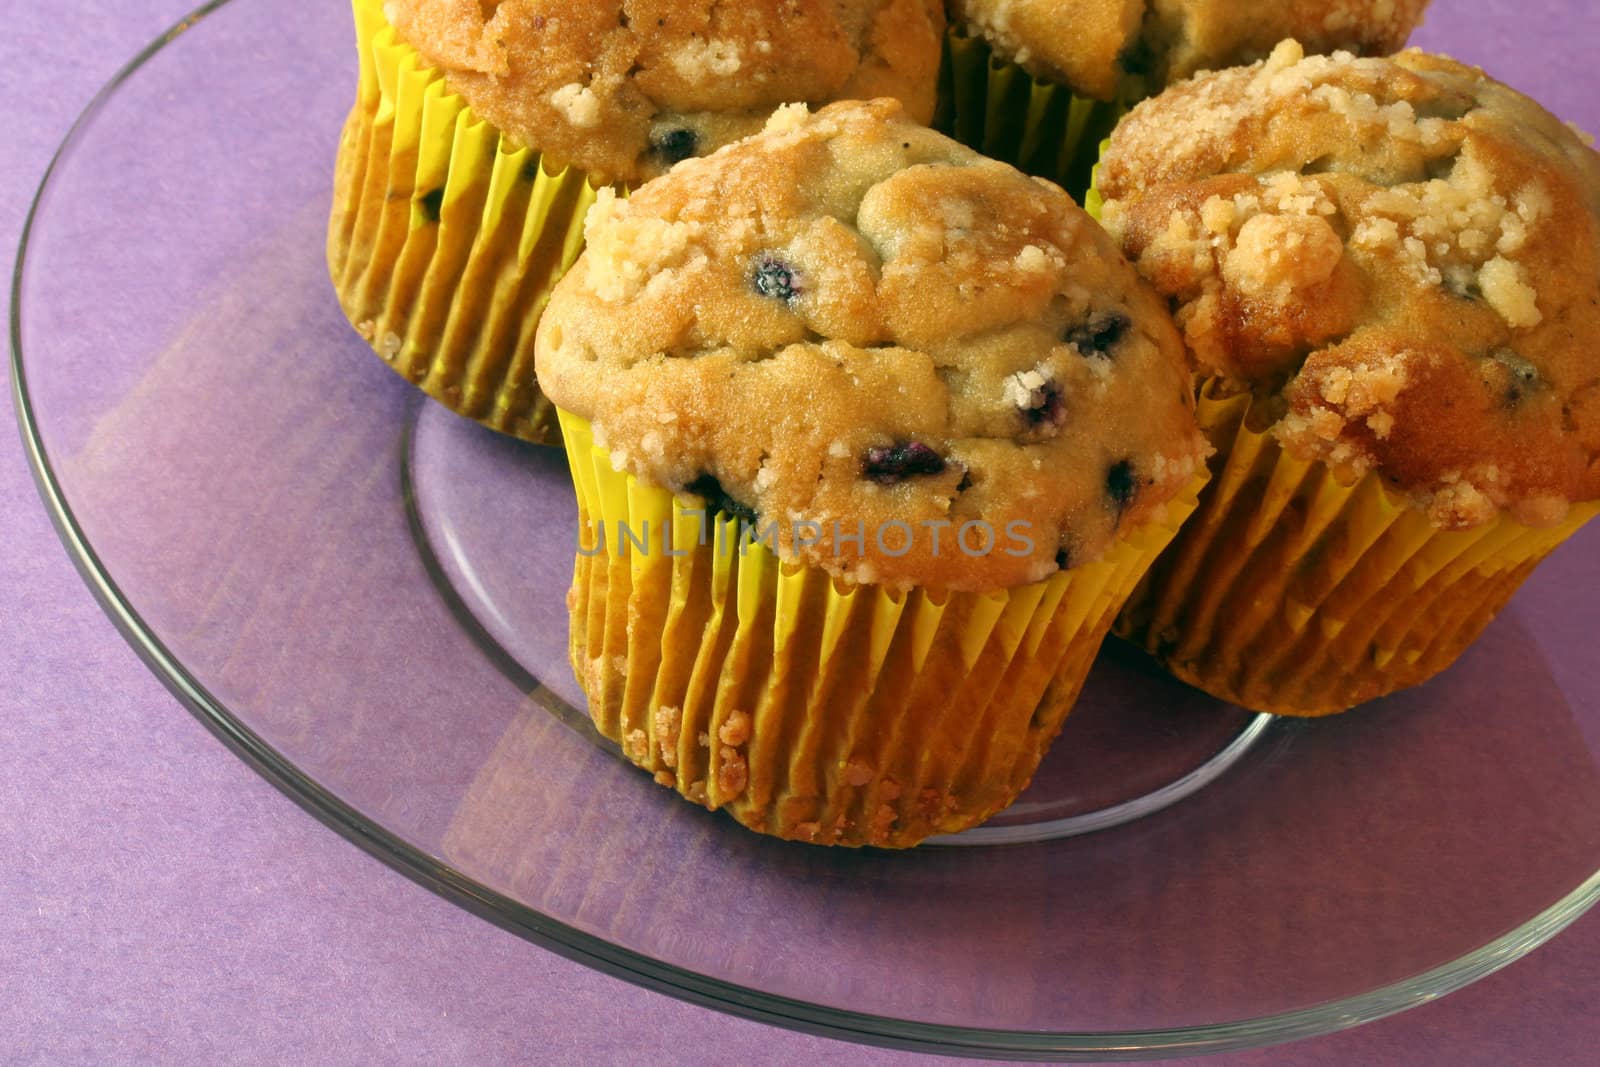 Blueberry muffins on glass plate.